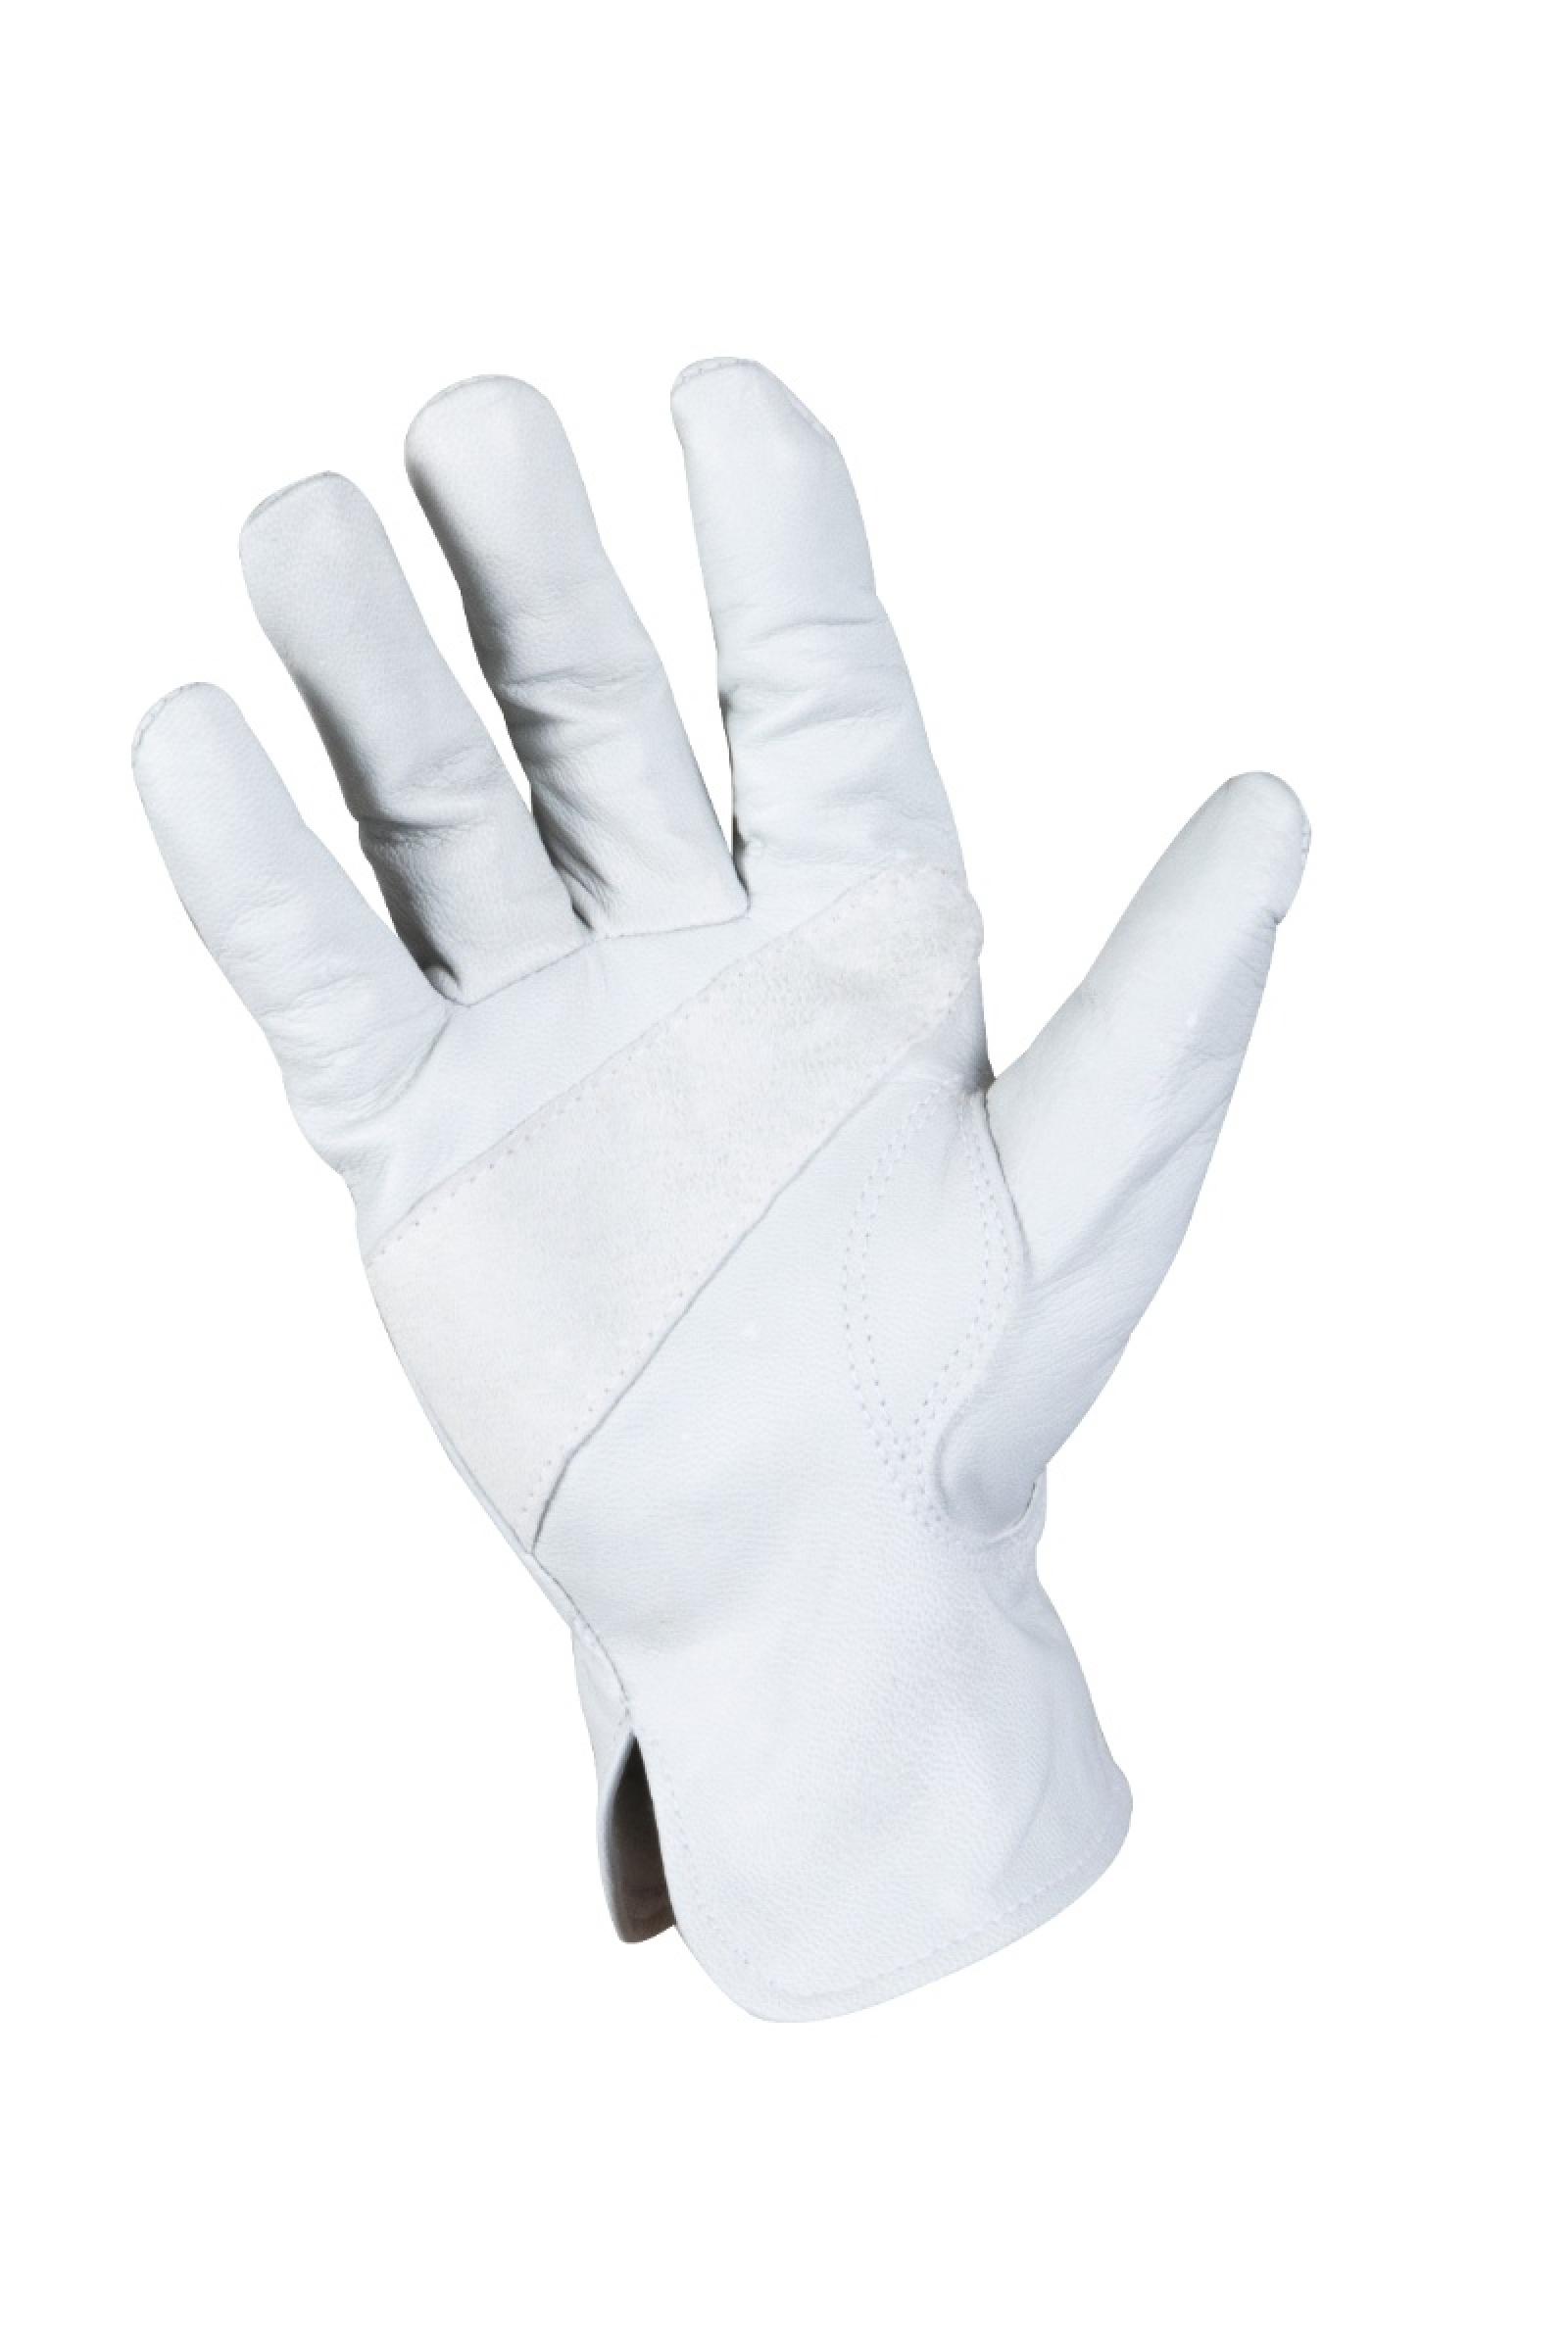 Noble Outfitters Goatskin Leather Work Glove Palm